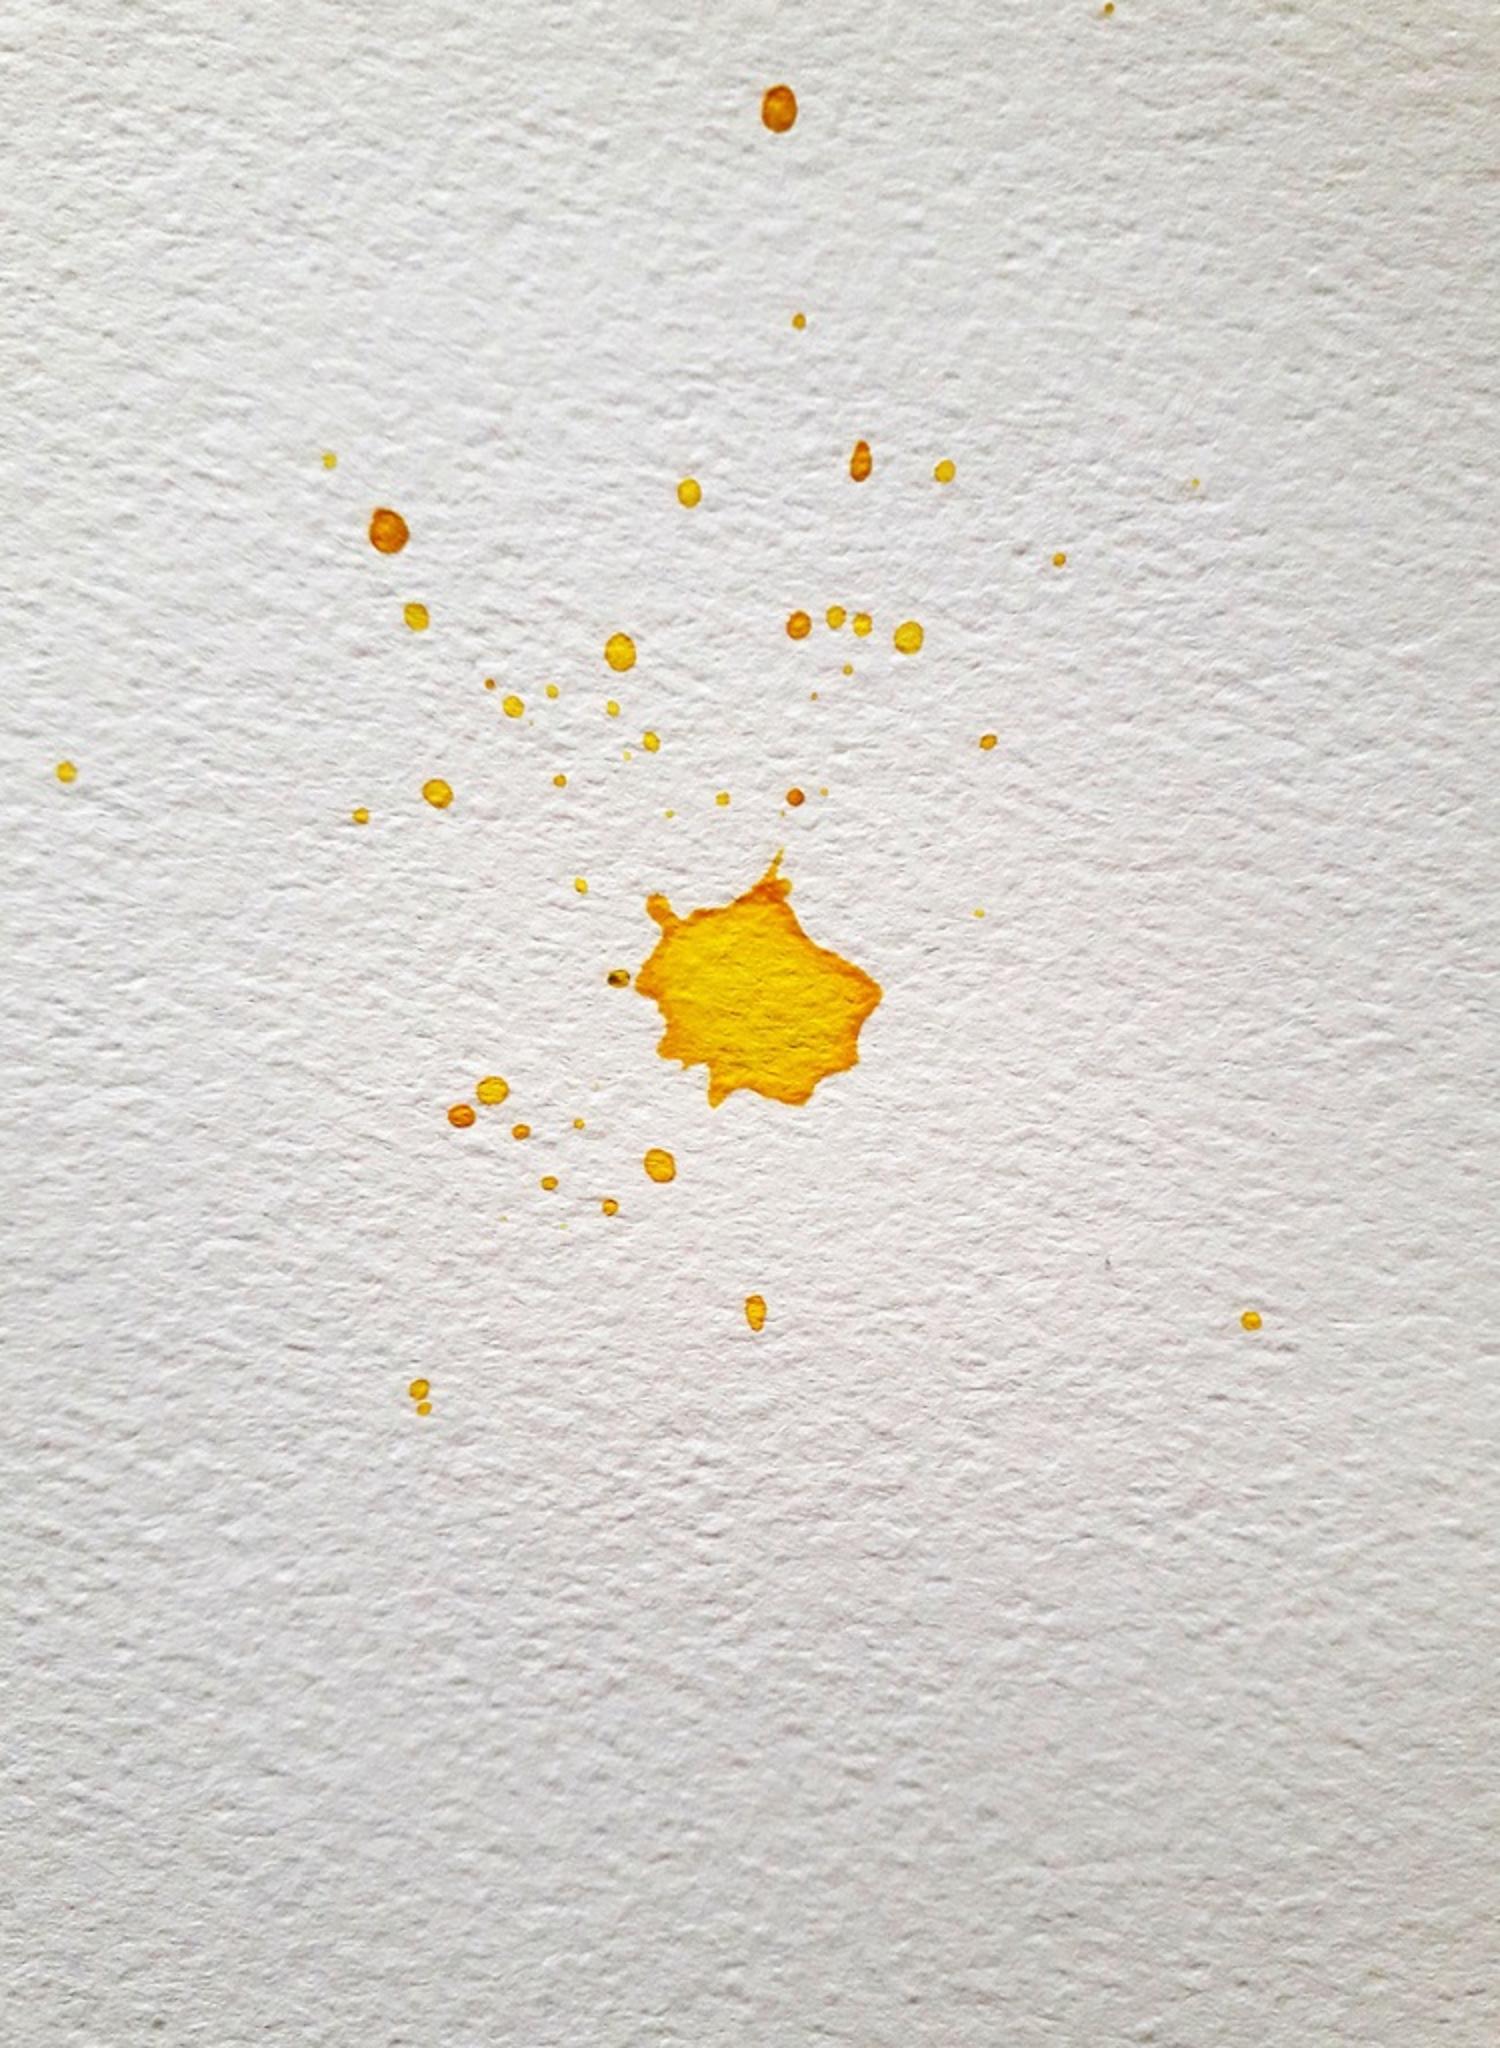 Lemon Juice is an original watercolor on paper 300g/m2 realized by Antonietta Valente in 2020.

Hand-signed and dated on the back. Perfect conditions. Certificate of authenticity provided by the artist.

A drizzle of yellow, live lemon juice, makes